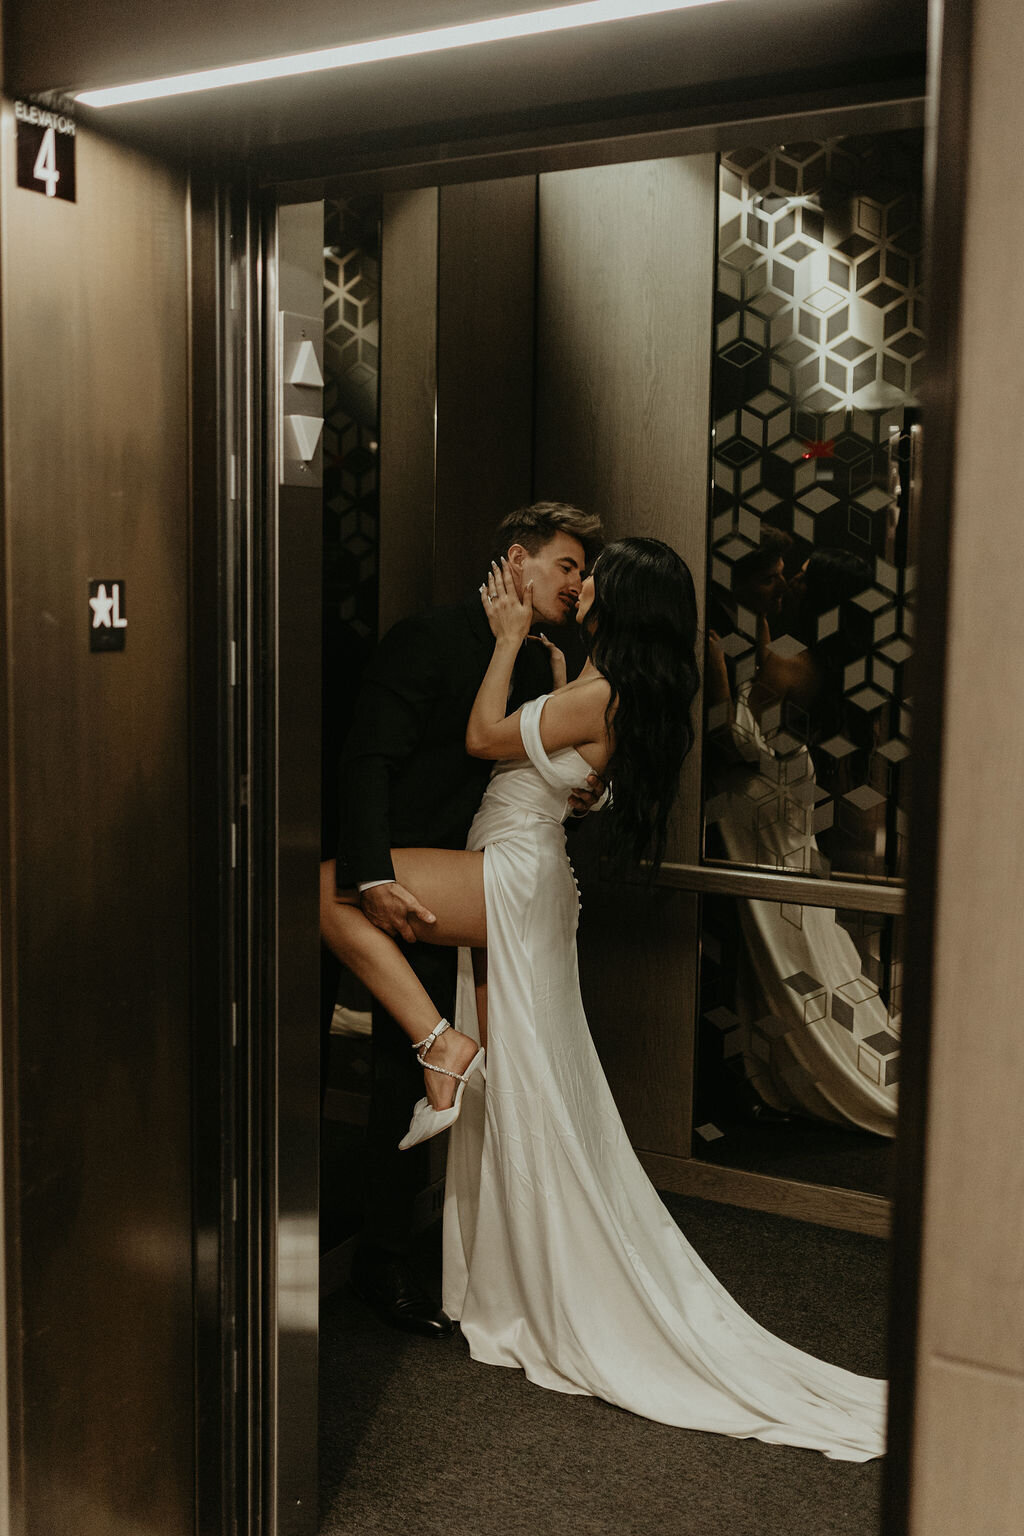 Bride-and-Groom-Kissing-Elevator-Photos